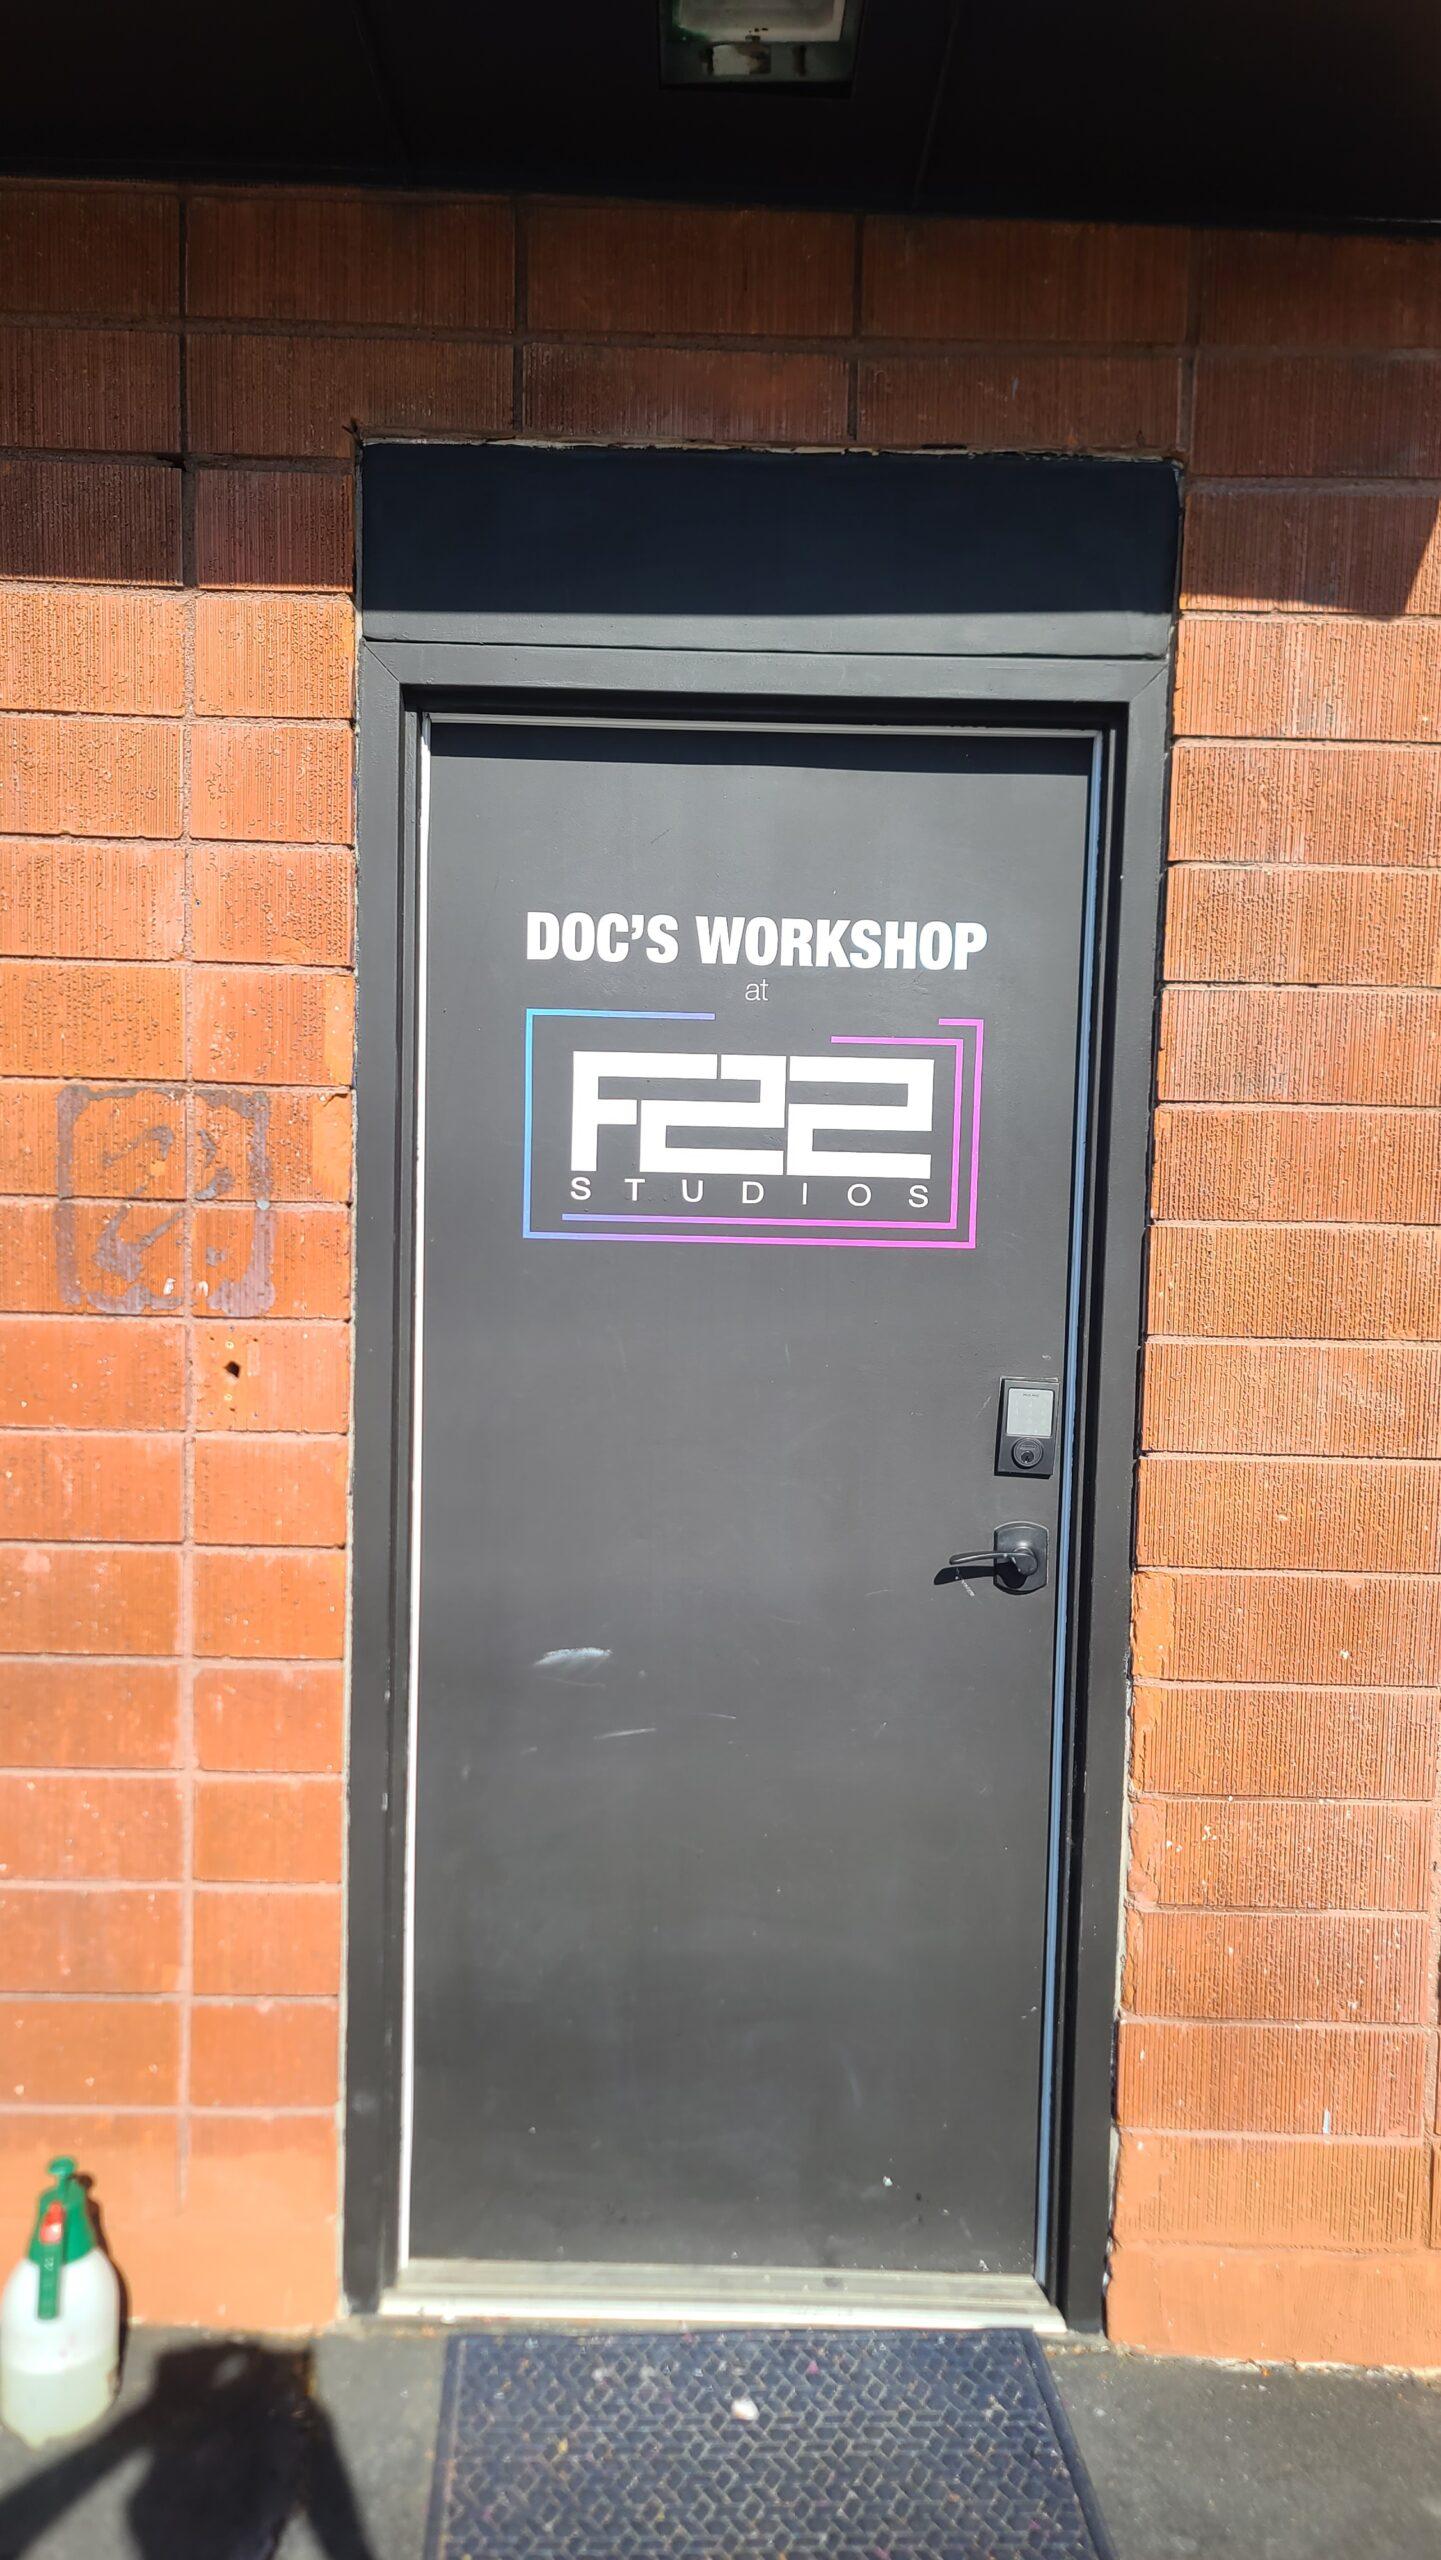 You are currently viewing Vinyl letters for signs make an impression on F22 Studios door signage